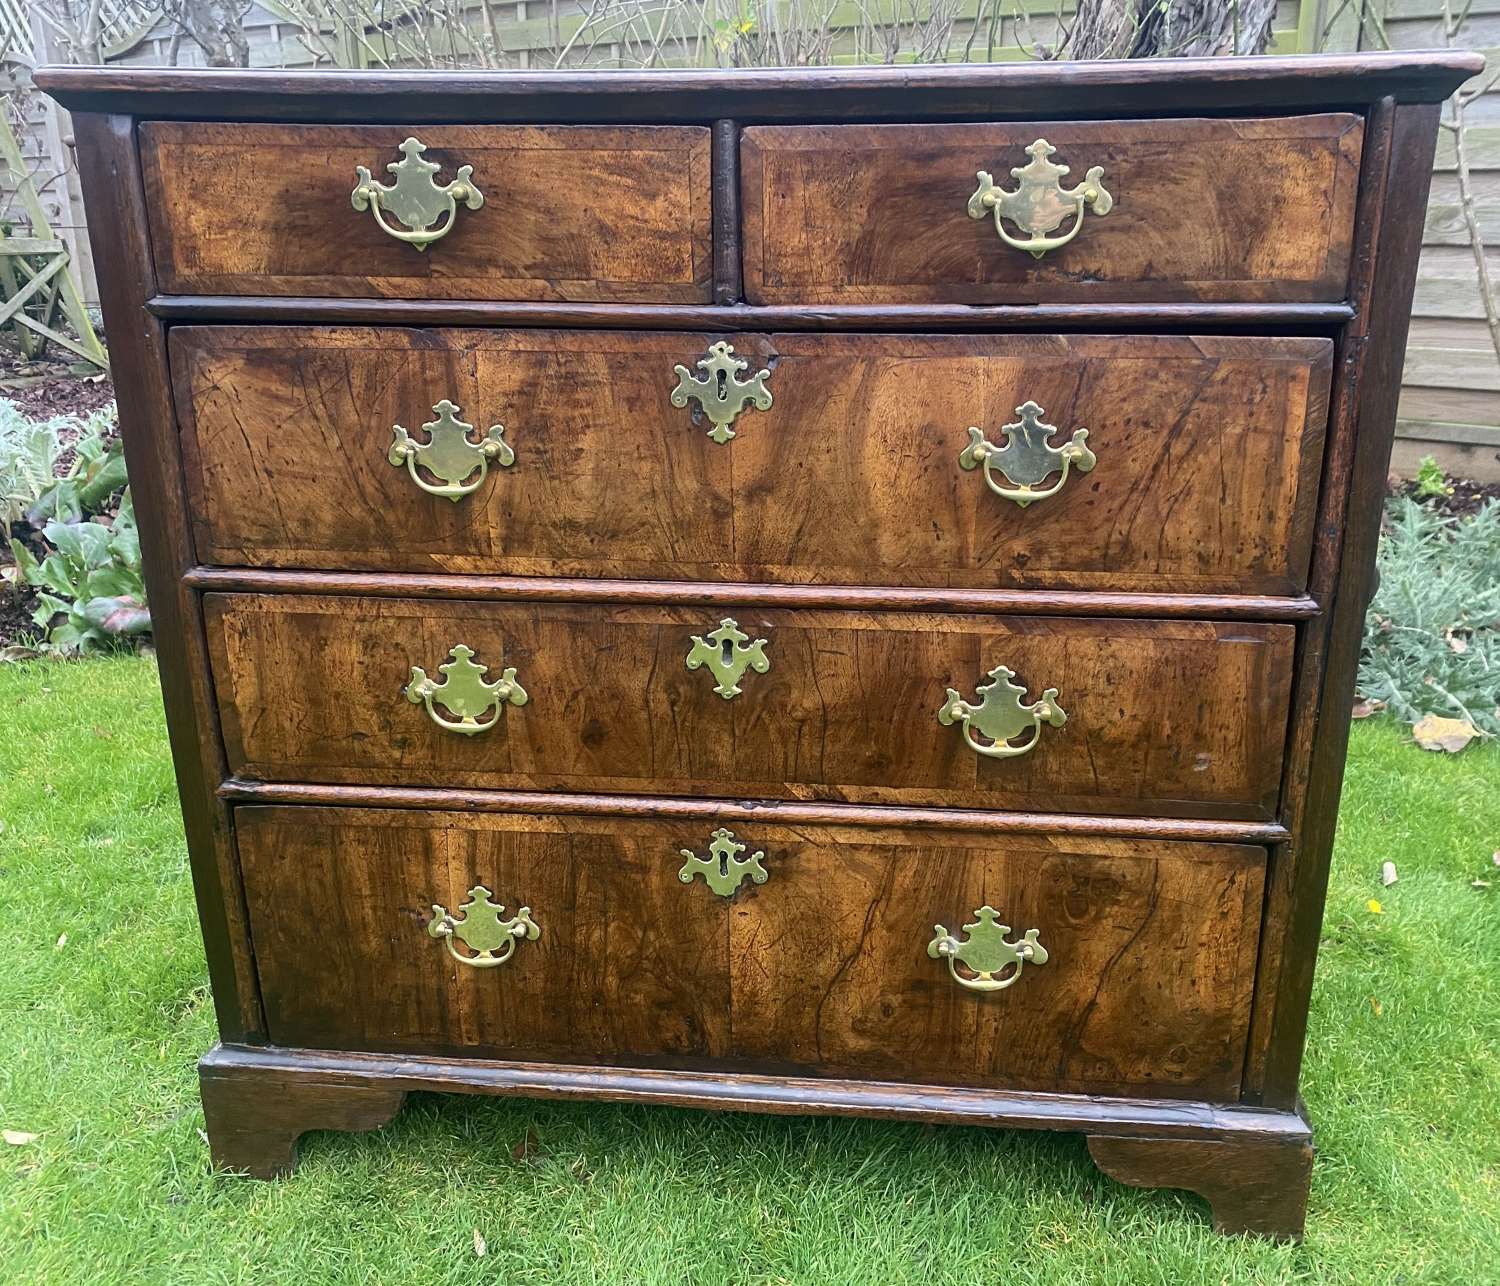 18th Century burr walnut and oak chest of drawers